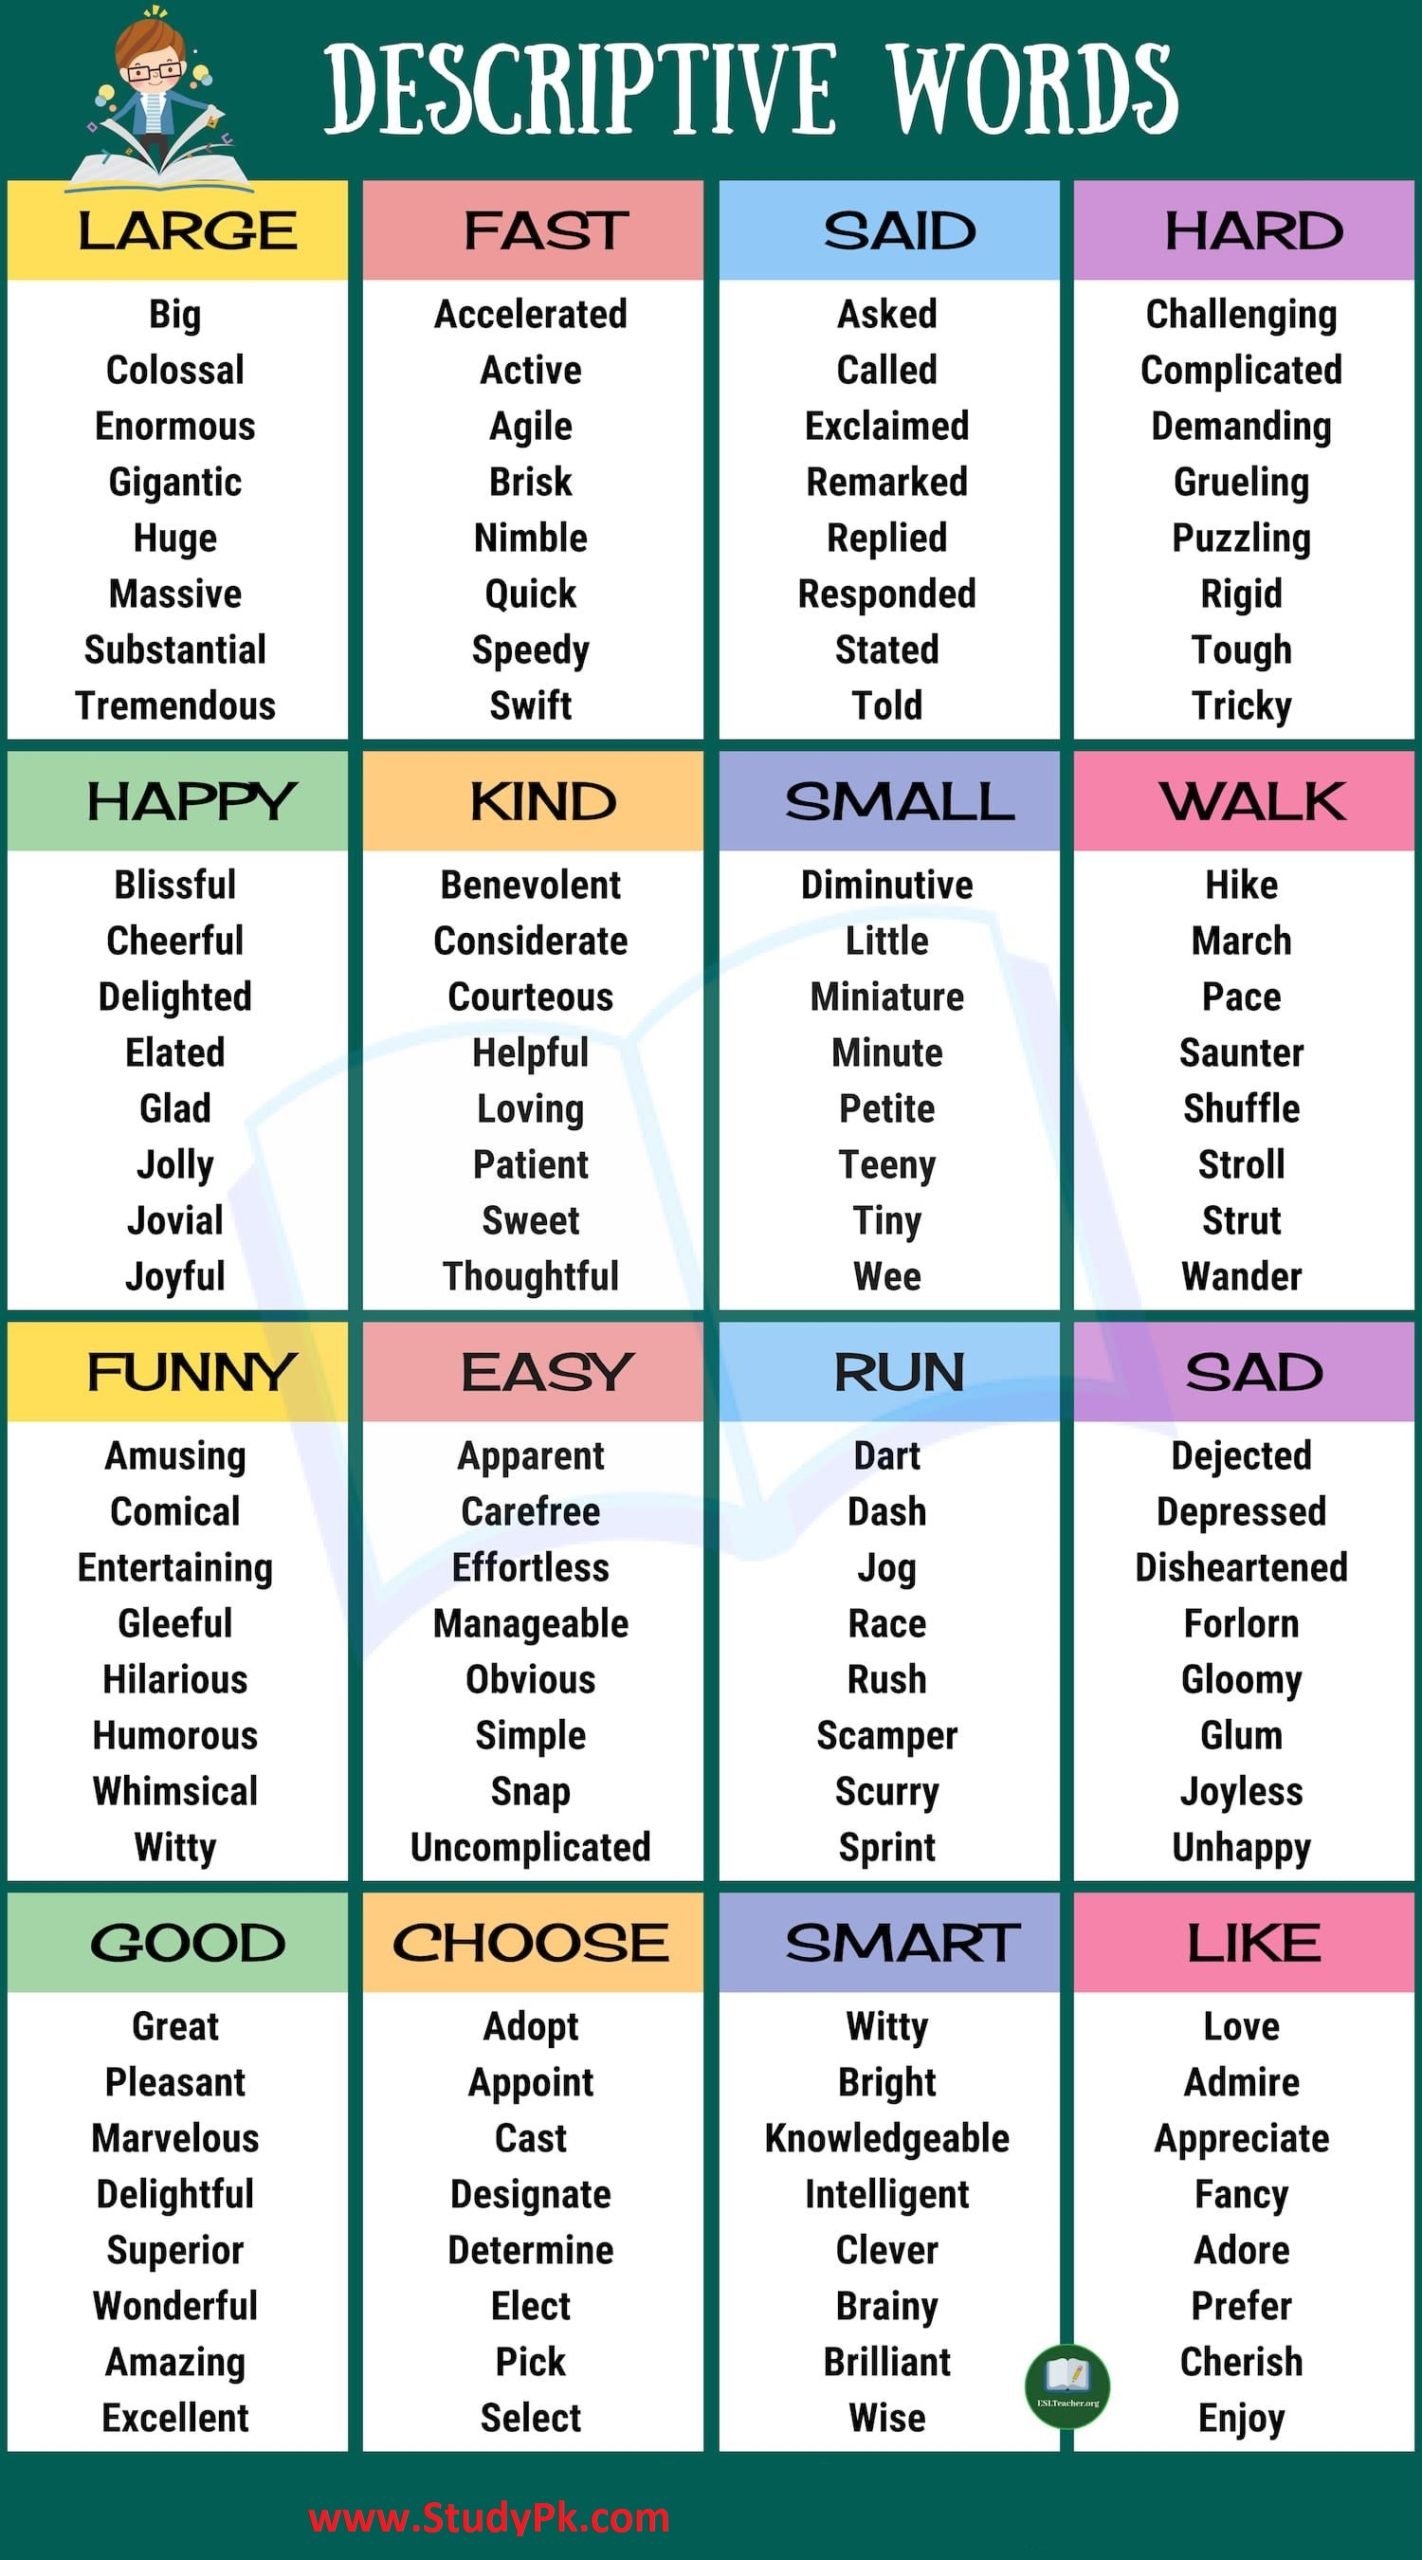 list-of-descriptive-words-adjectives-adverbs-and-gerunds-in-english